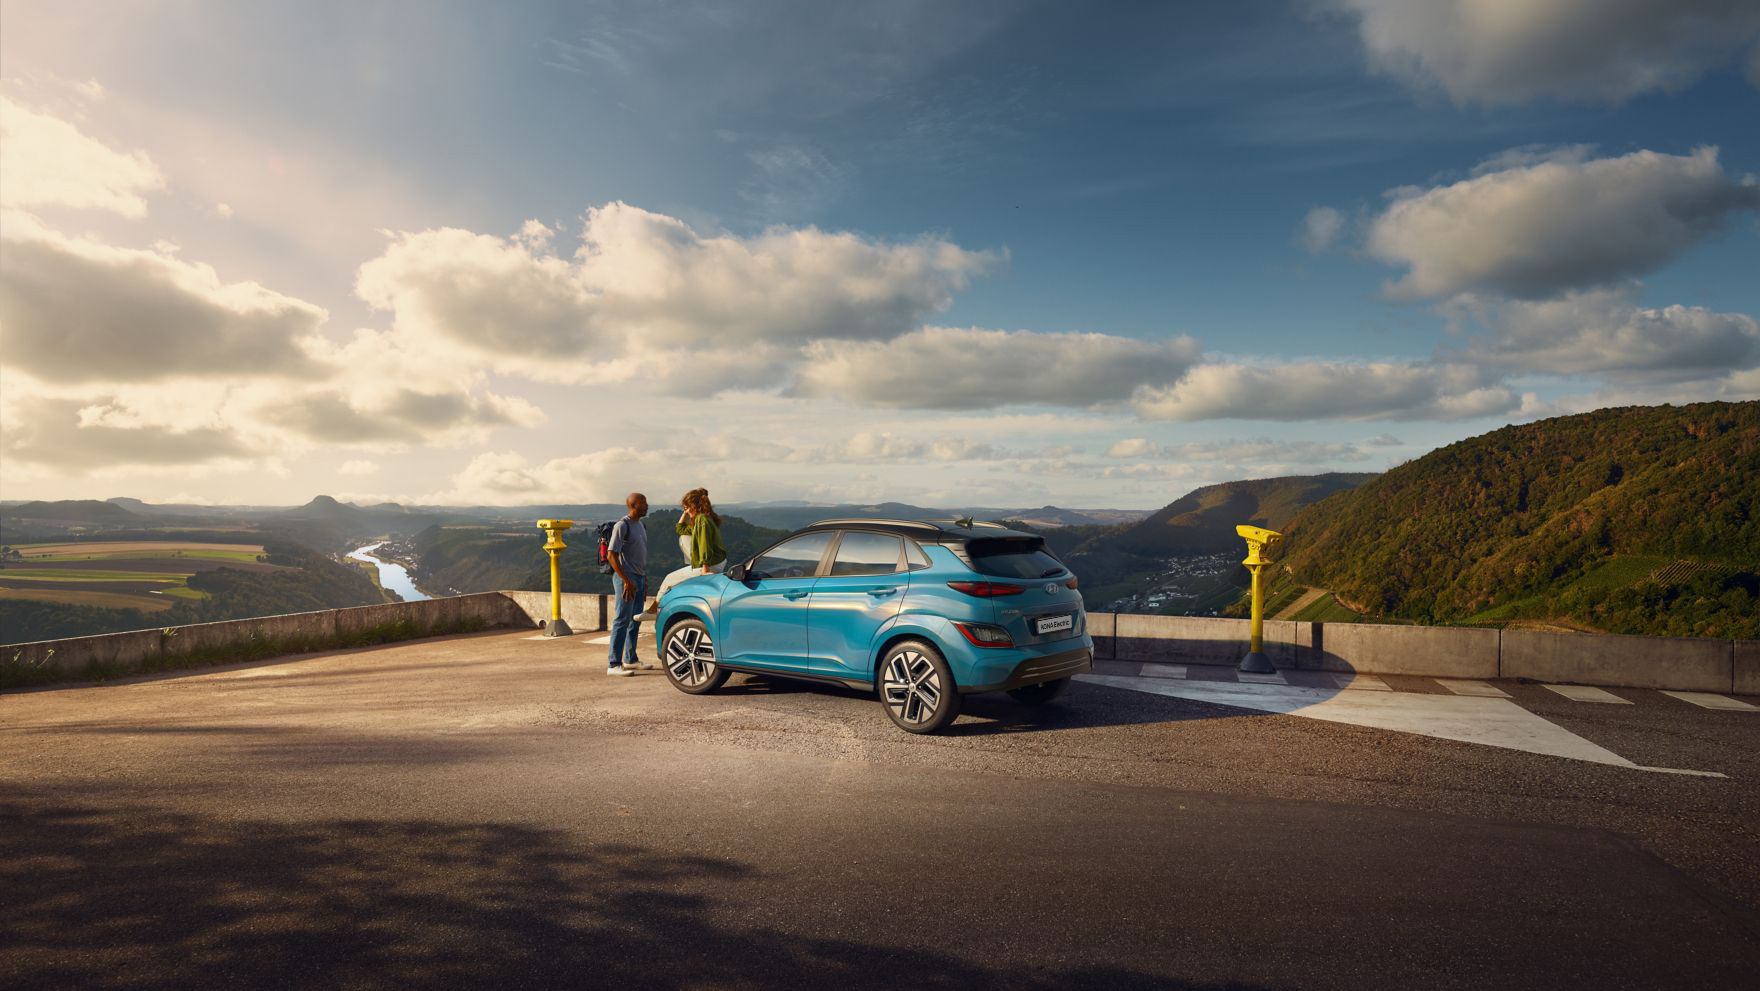 The new Hyundai Kona Electric standing in a parking lot with a great view over the country side.